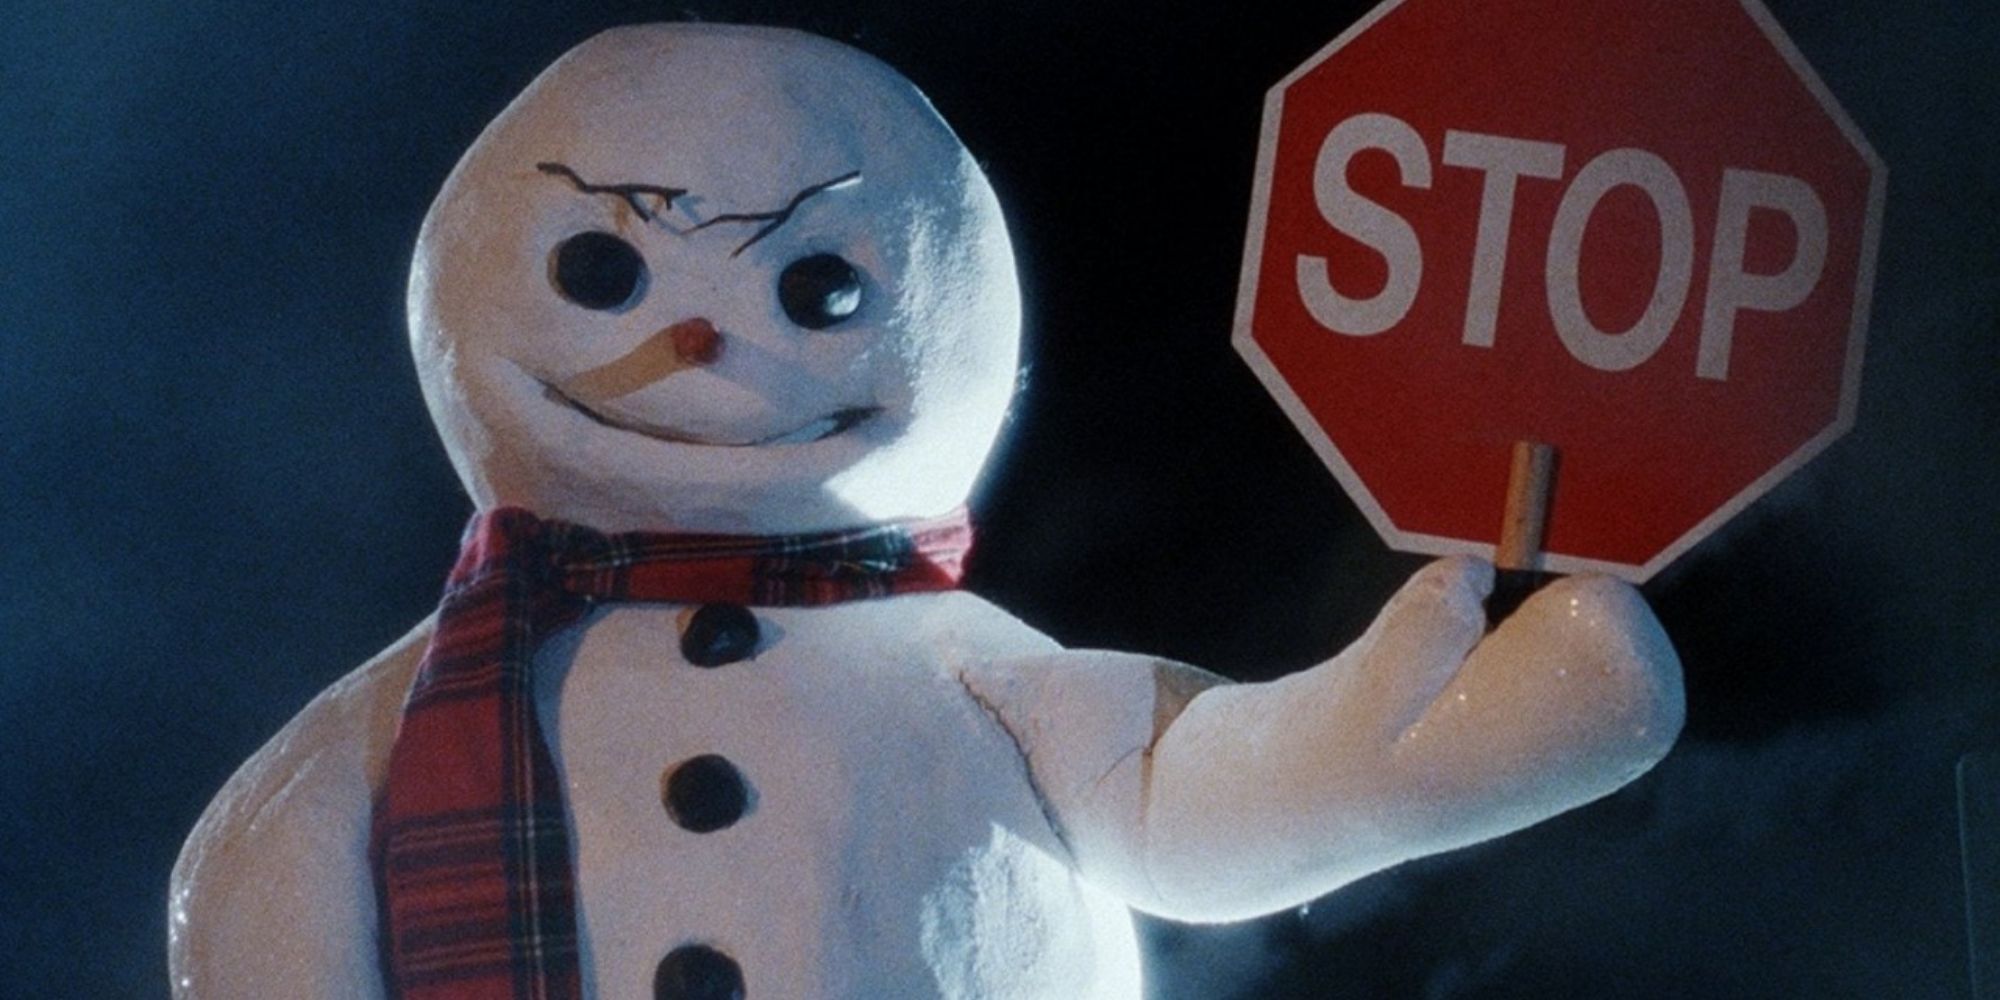 The killer snowman holds up a stop sign and grins evilly